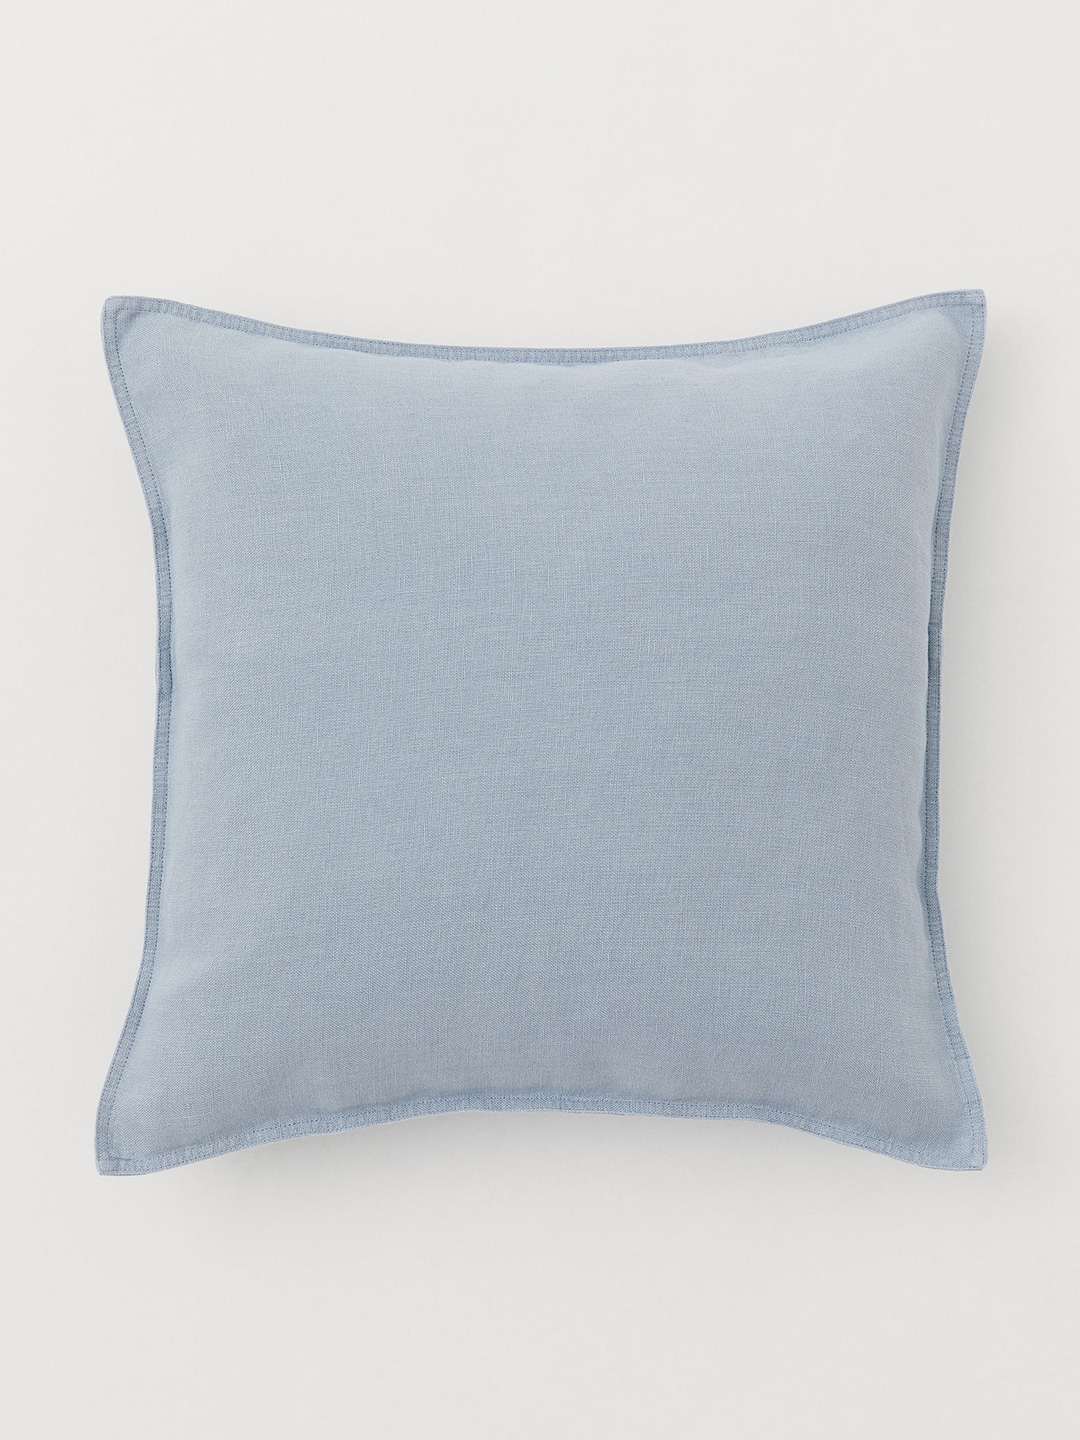 H&M Blue Washed Linen Cushion Cover